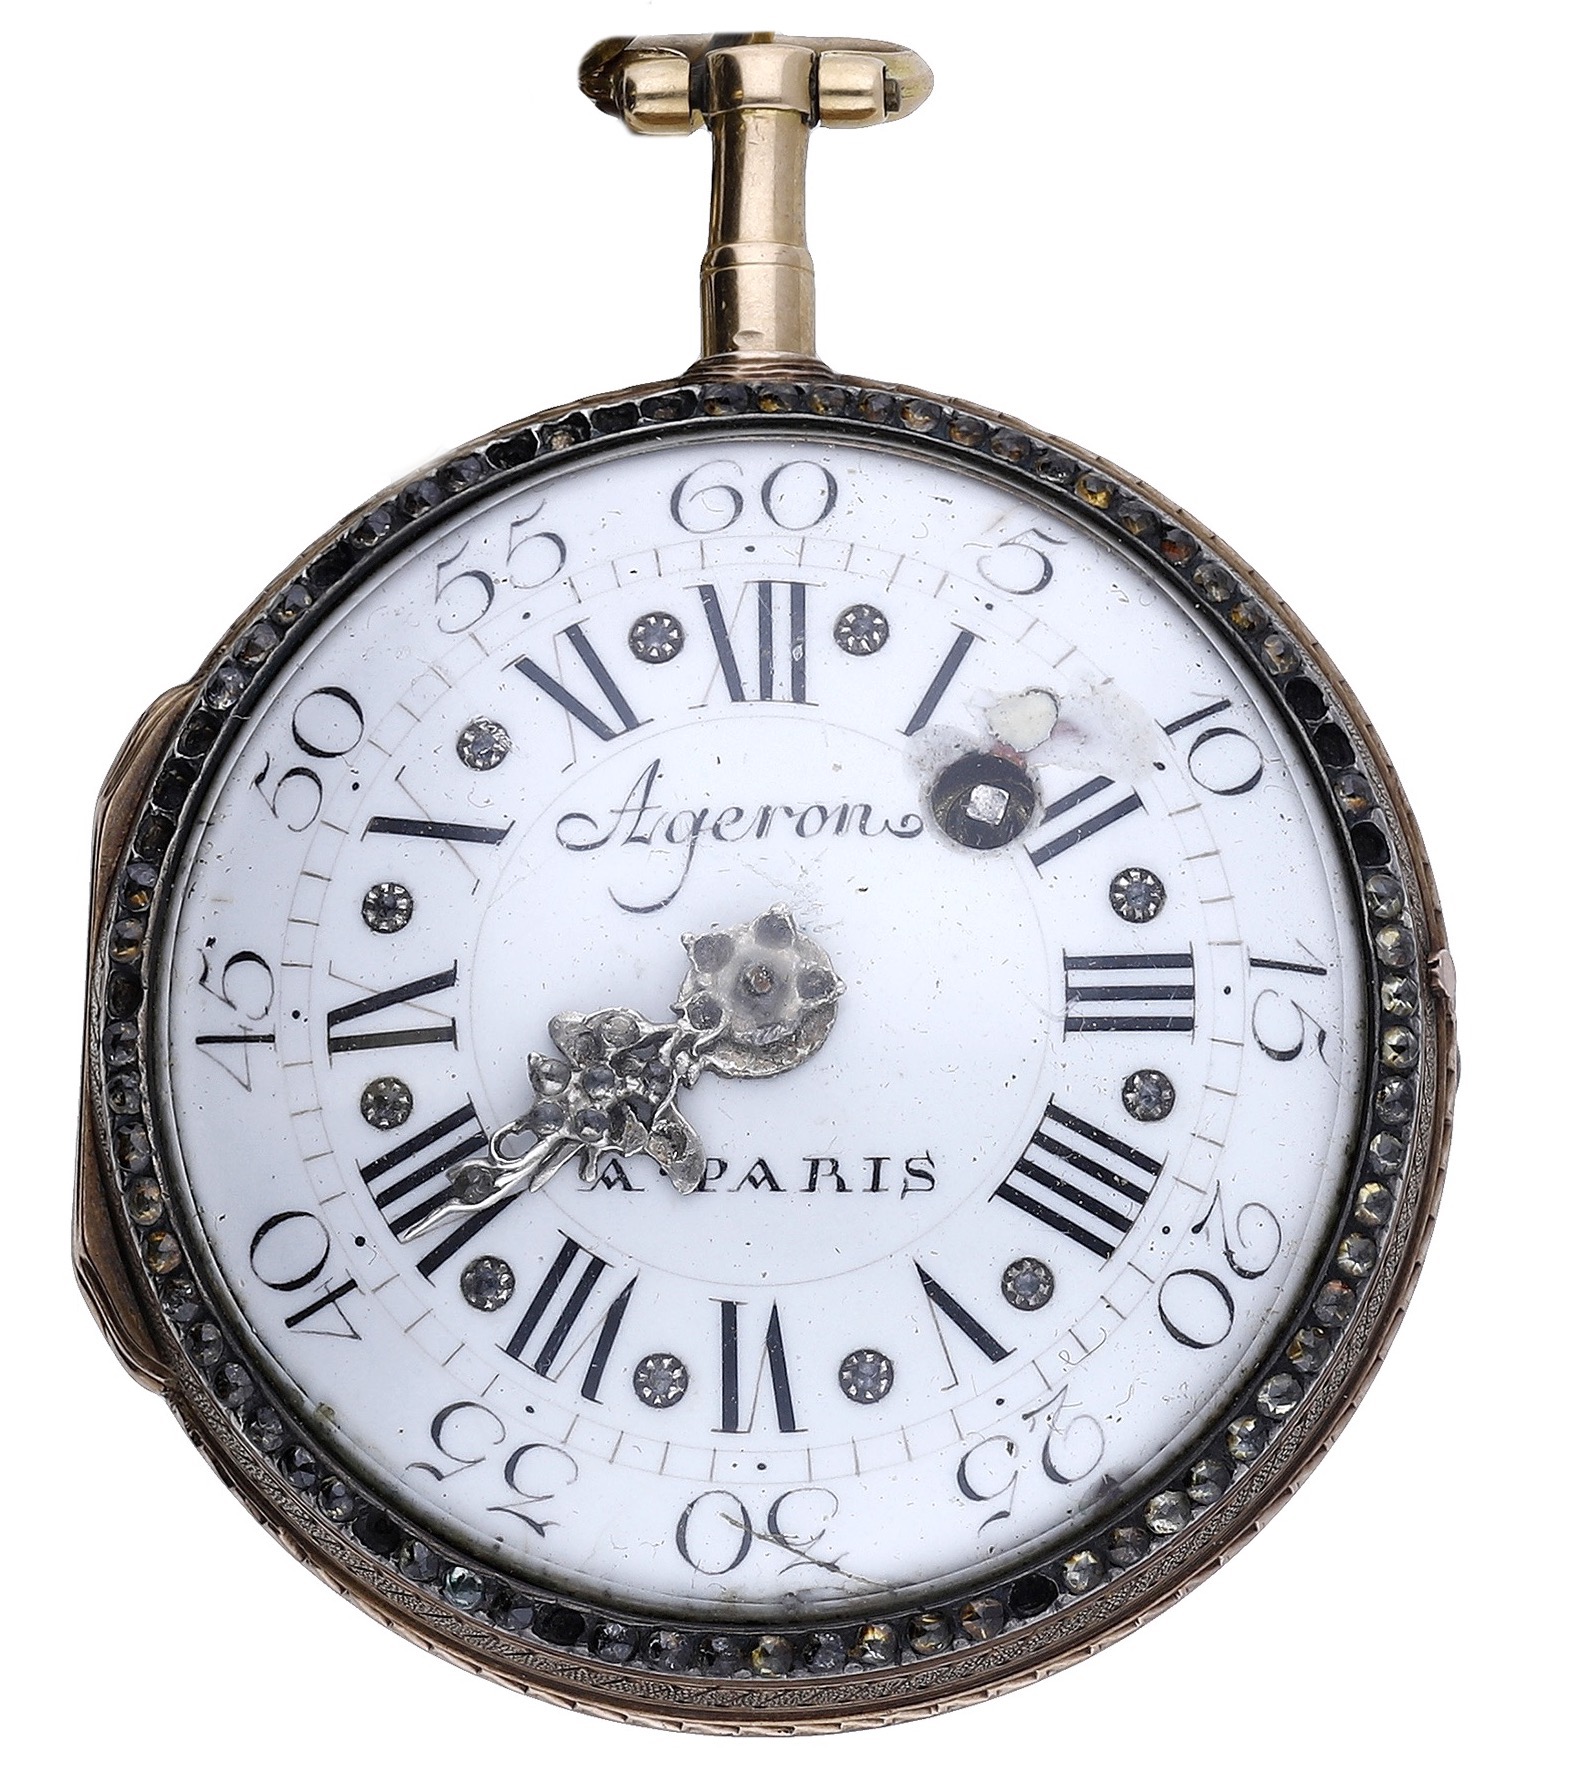 Ageron. A Paris. A gold and enamel pair cased watch, circa 1780. Movement: gilt full plate,... - Image 2 of 5